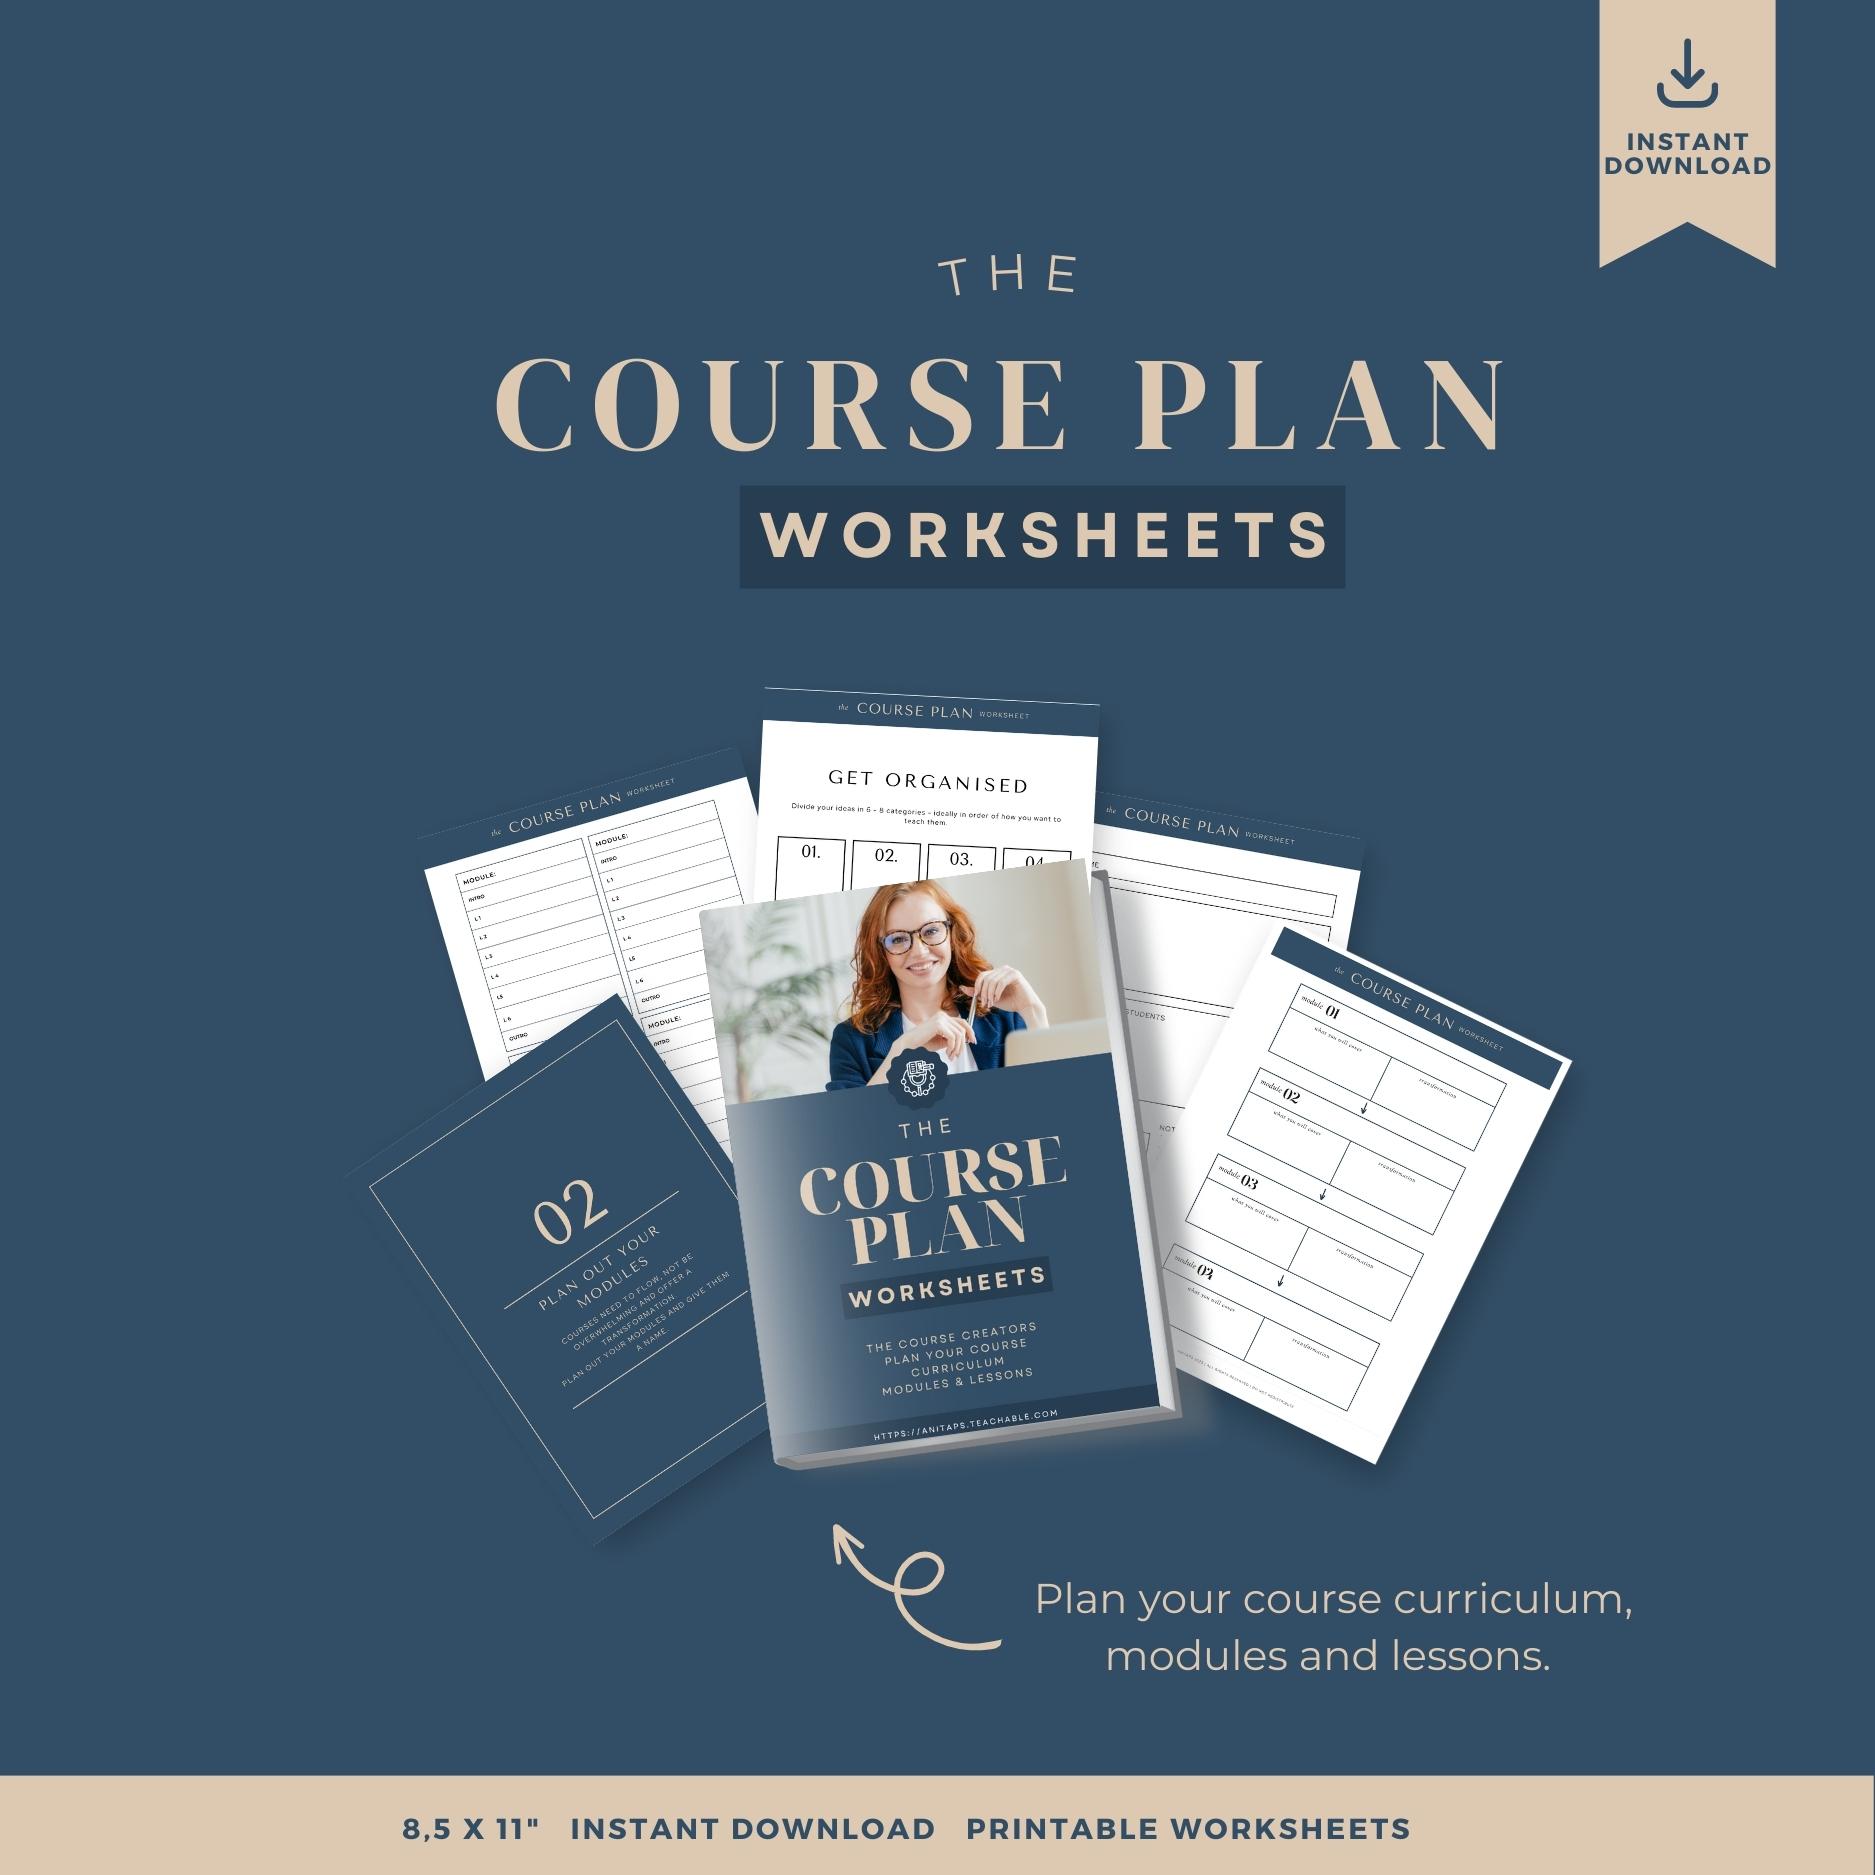 The course plan worksheets